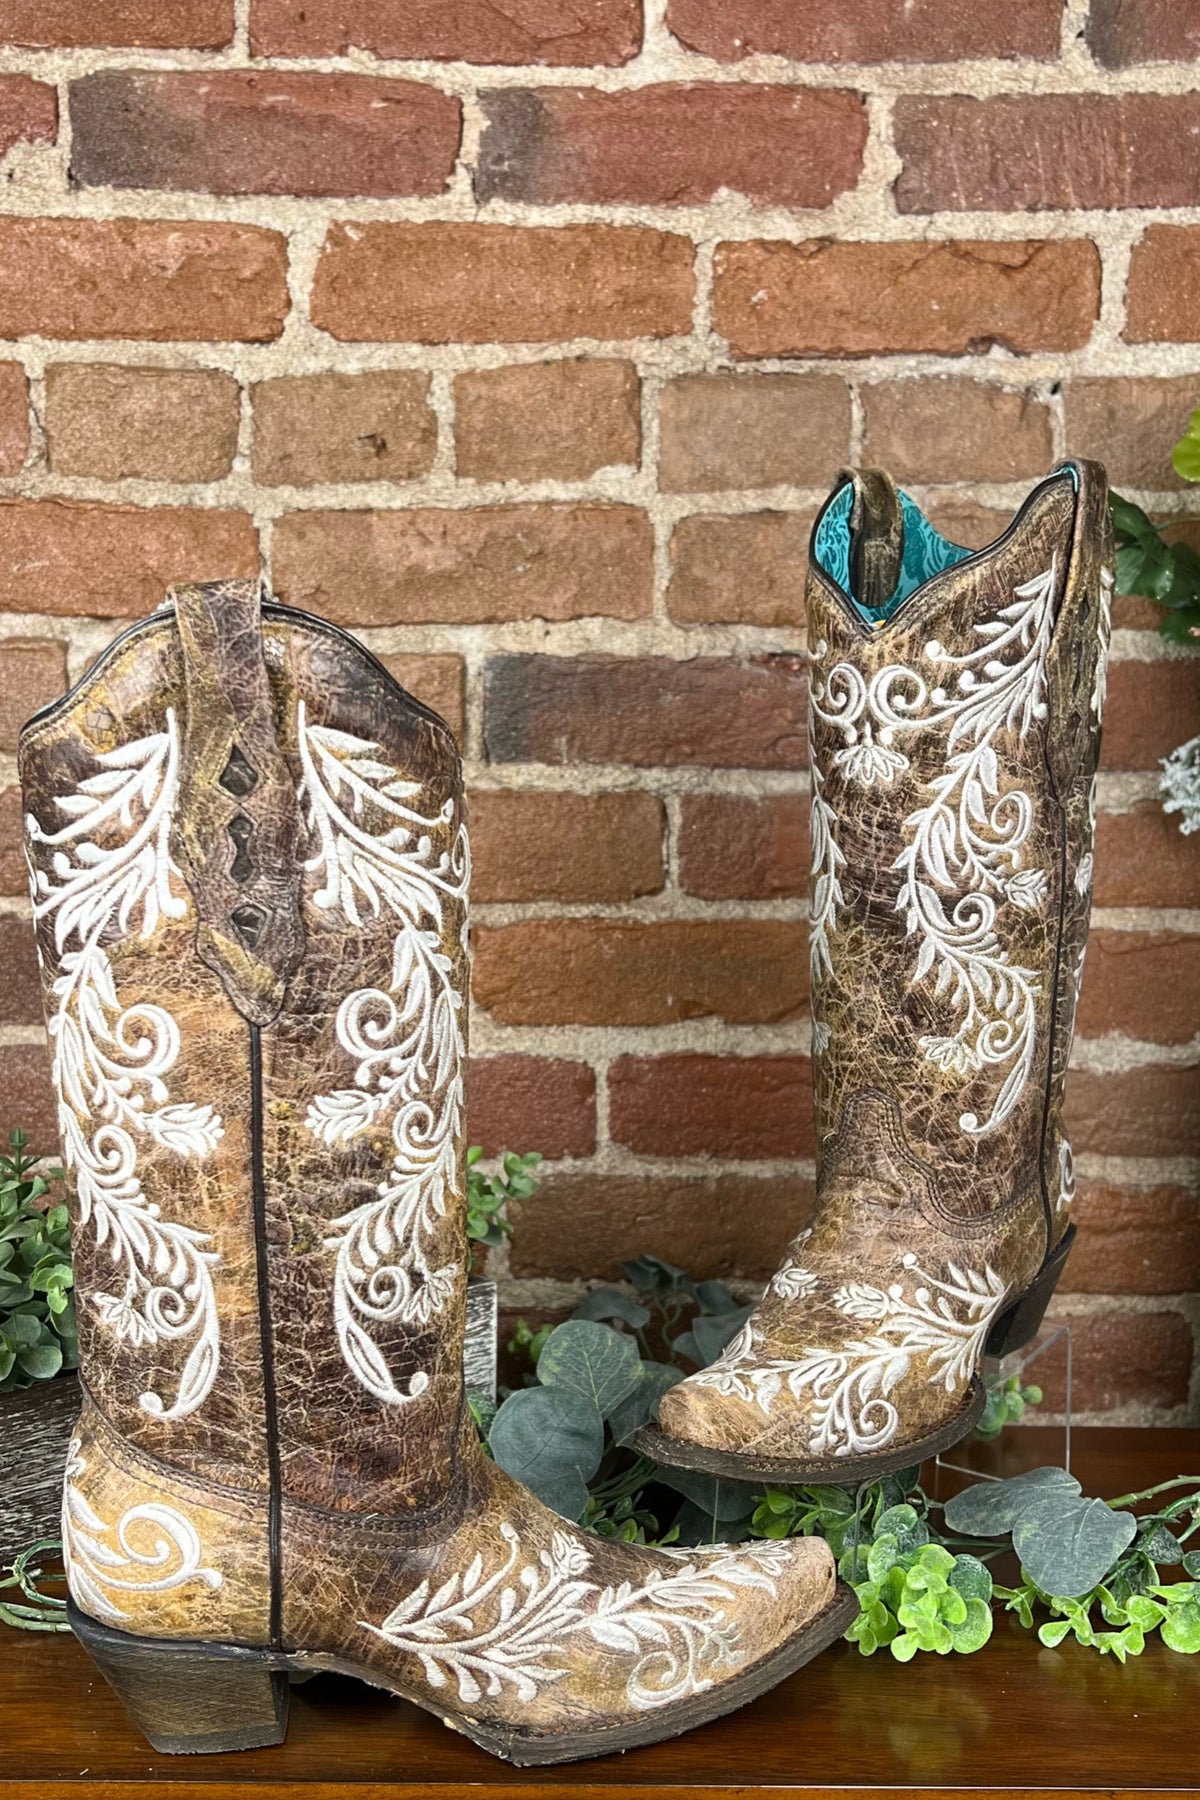 Distressed Brown Leather Snip Toe Boot with Embroidery by Corral Boots-Boot-Corral Boots/Circle G by Corral Boots-Gallop 'n Glitz- Women's Western Wear Boutique, Located in Grants Pass, Oregon